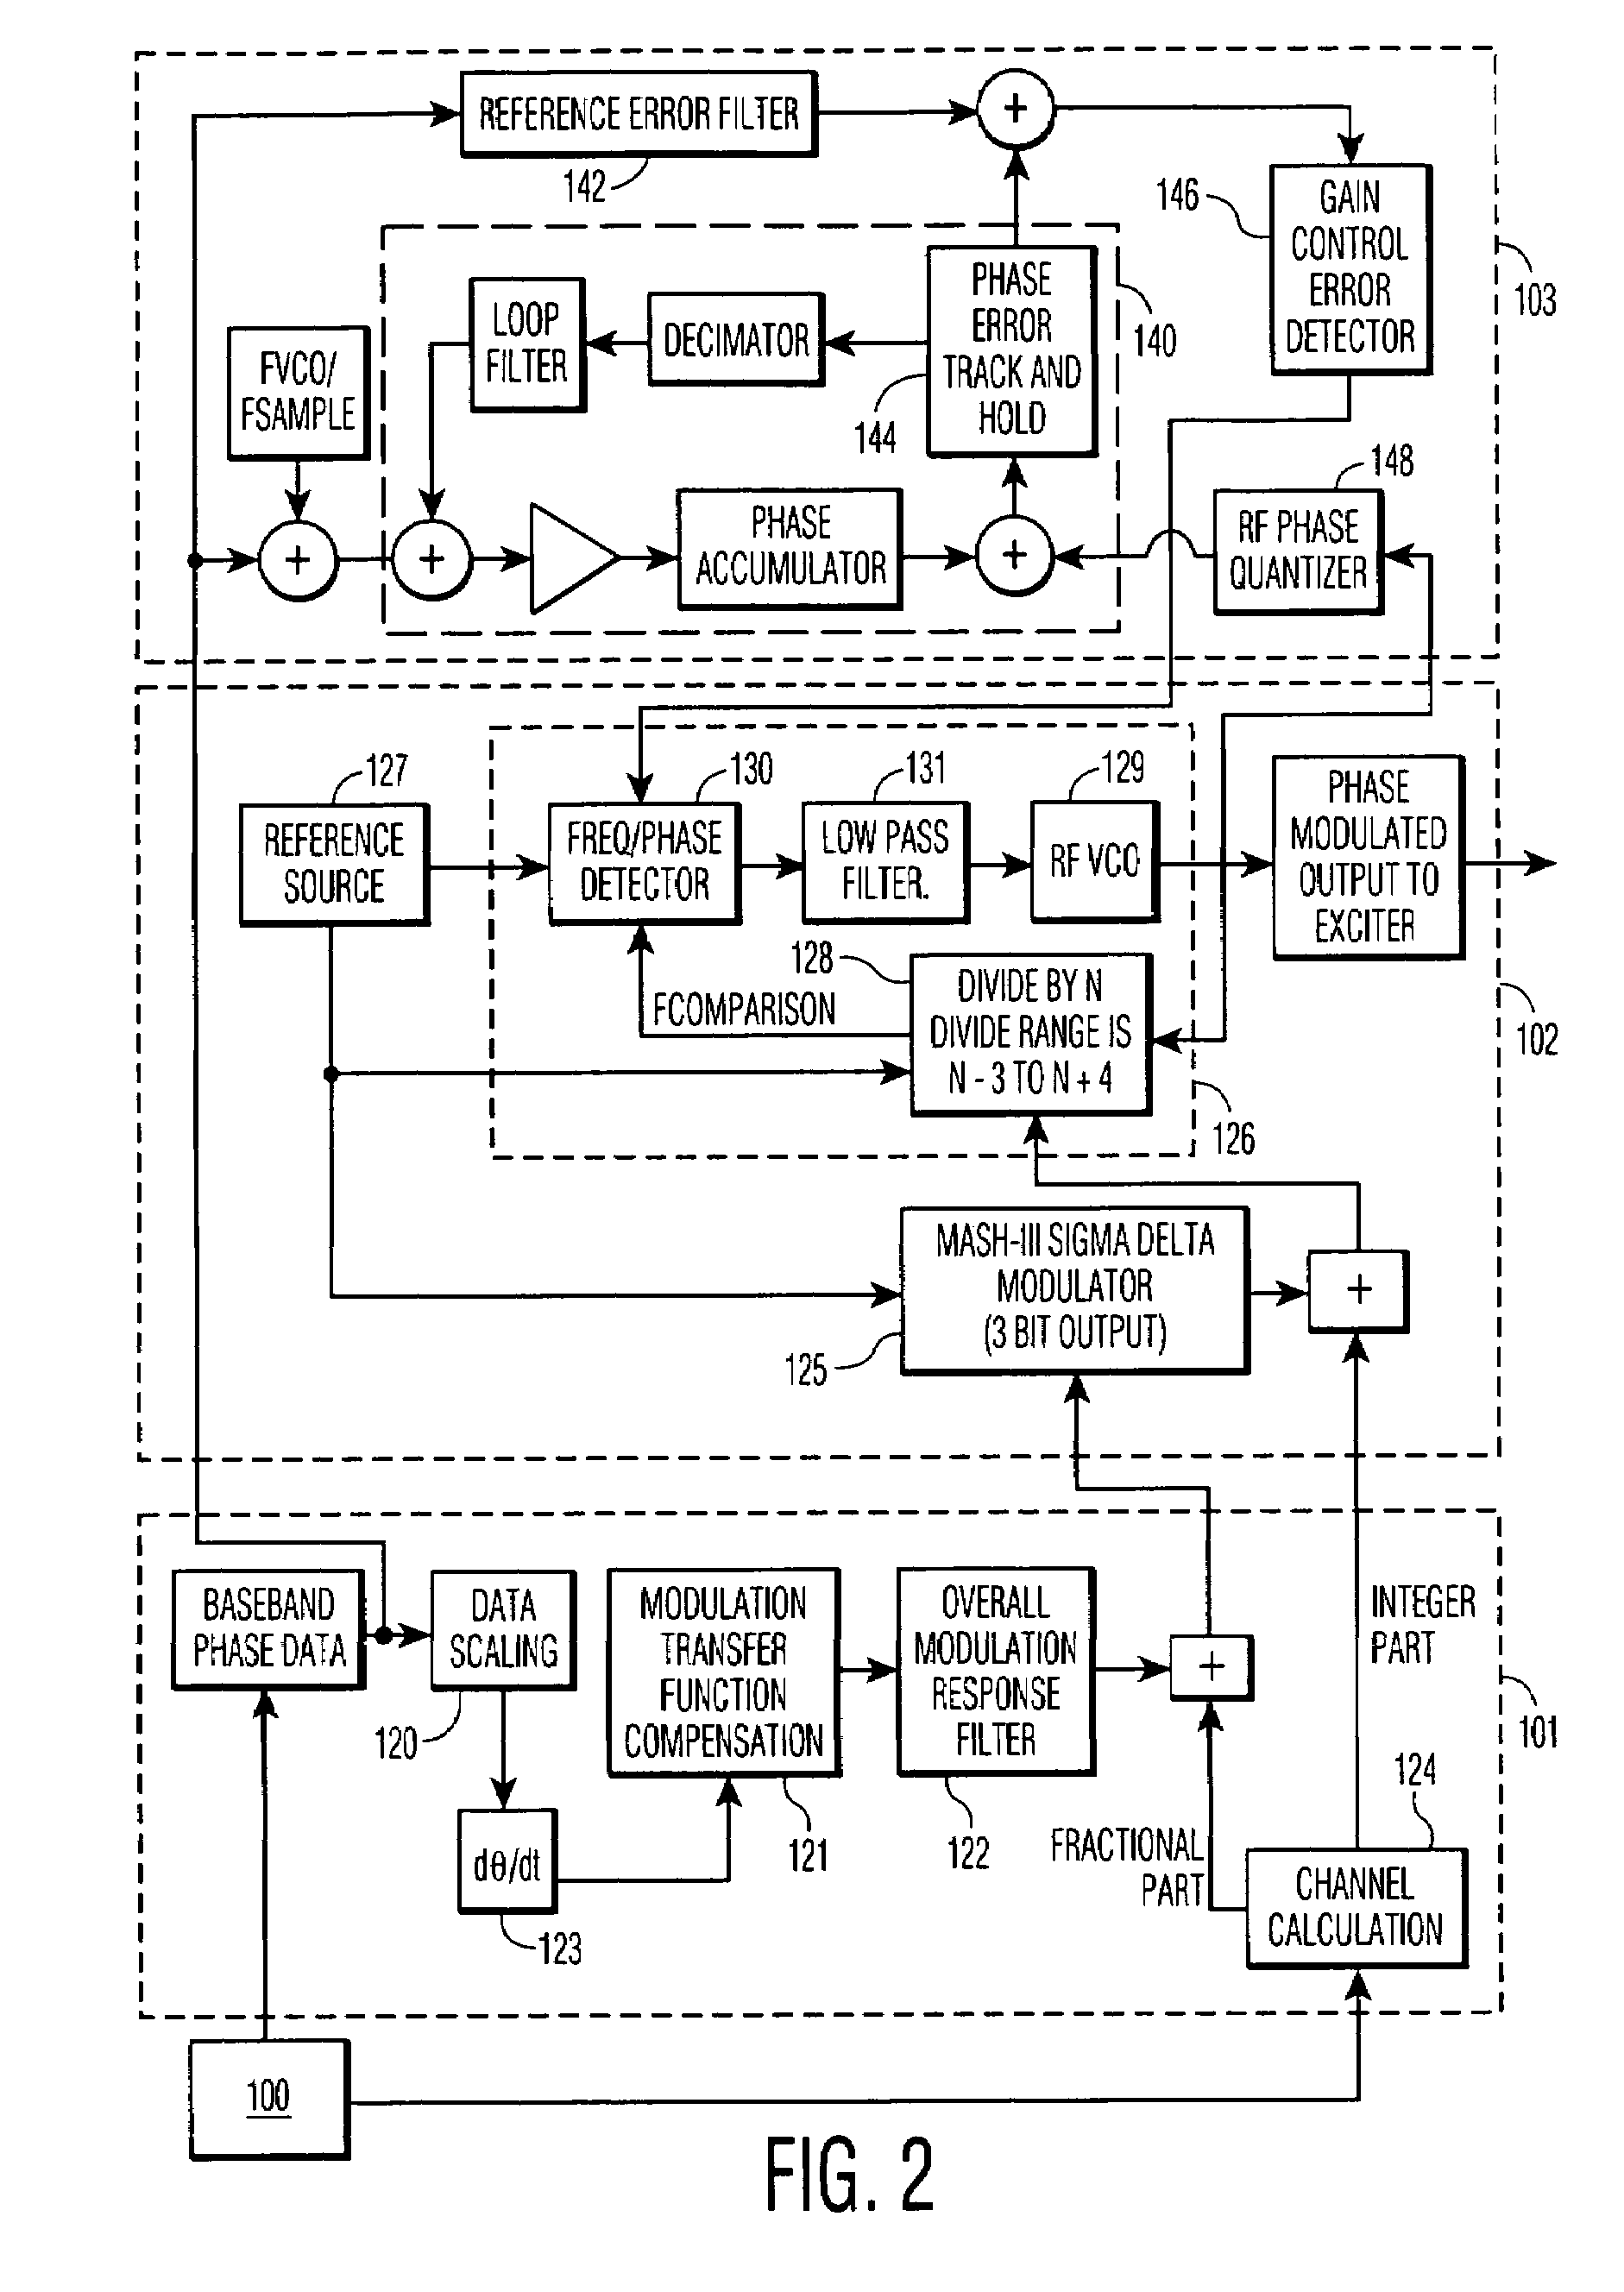 Apparatus, methods and articles of manufacture for wideband signal processing